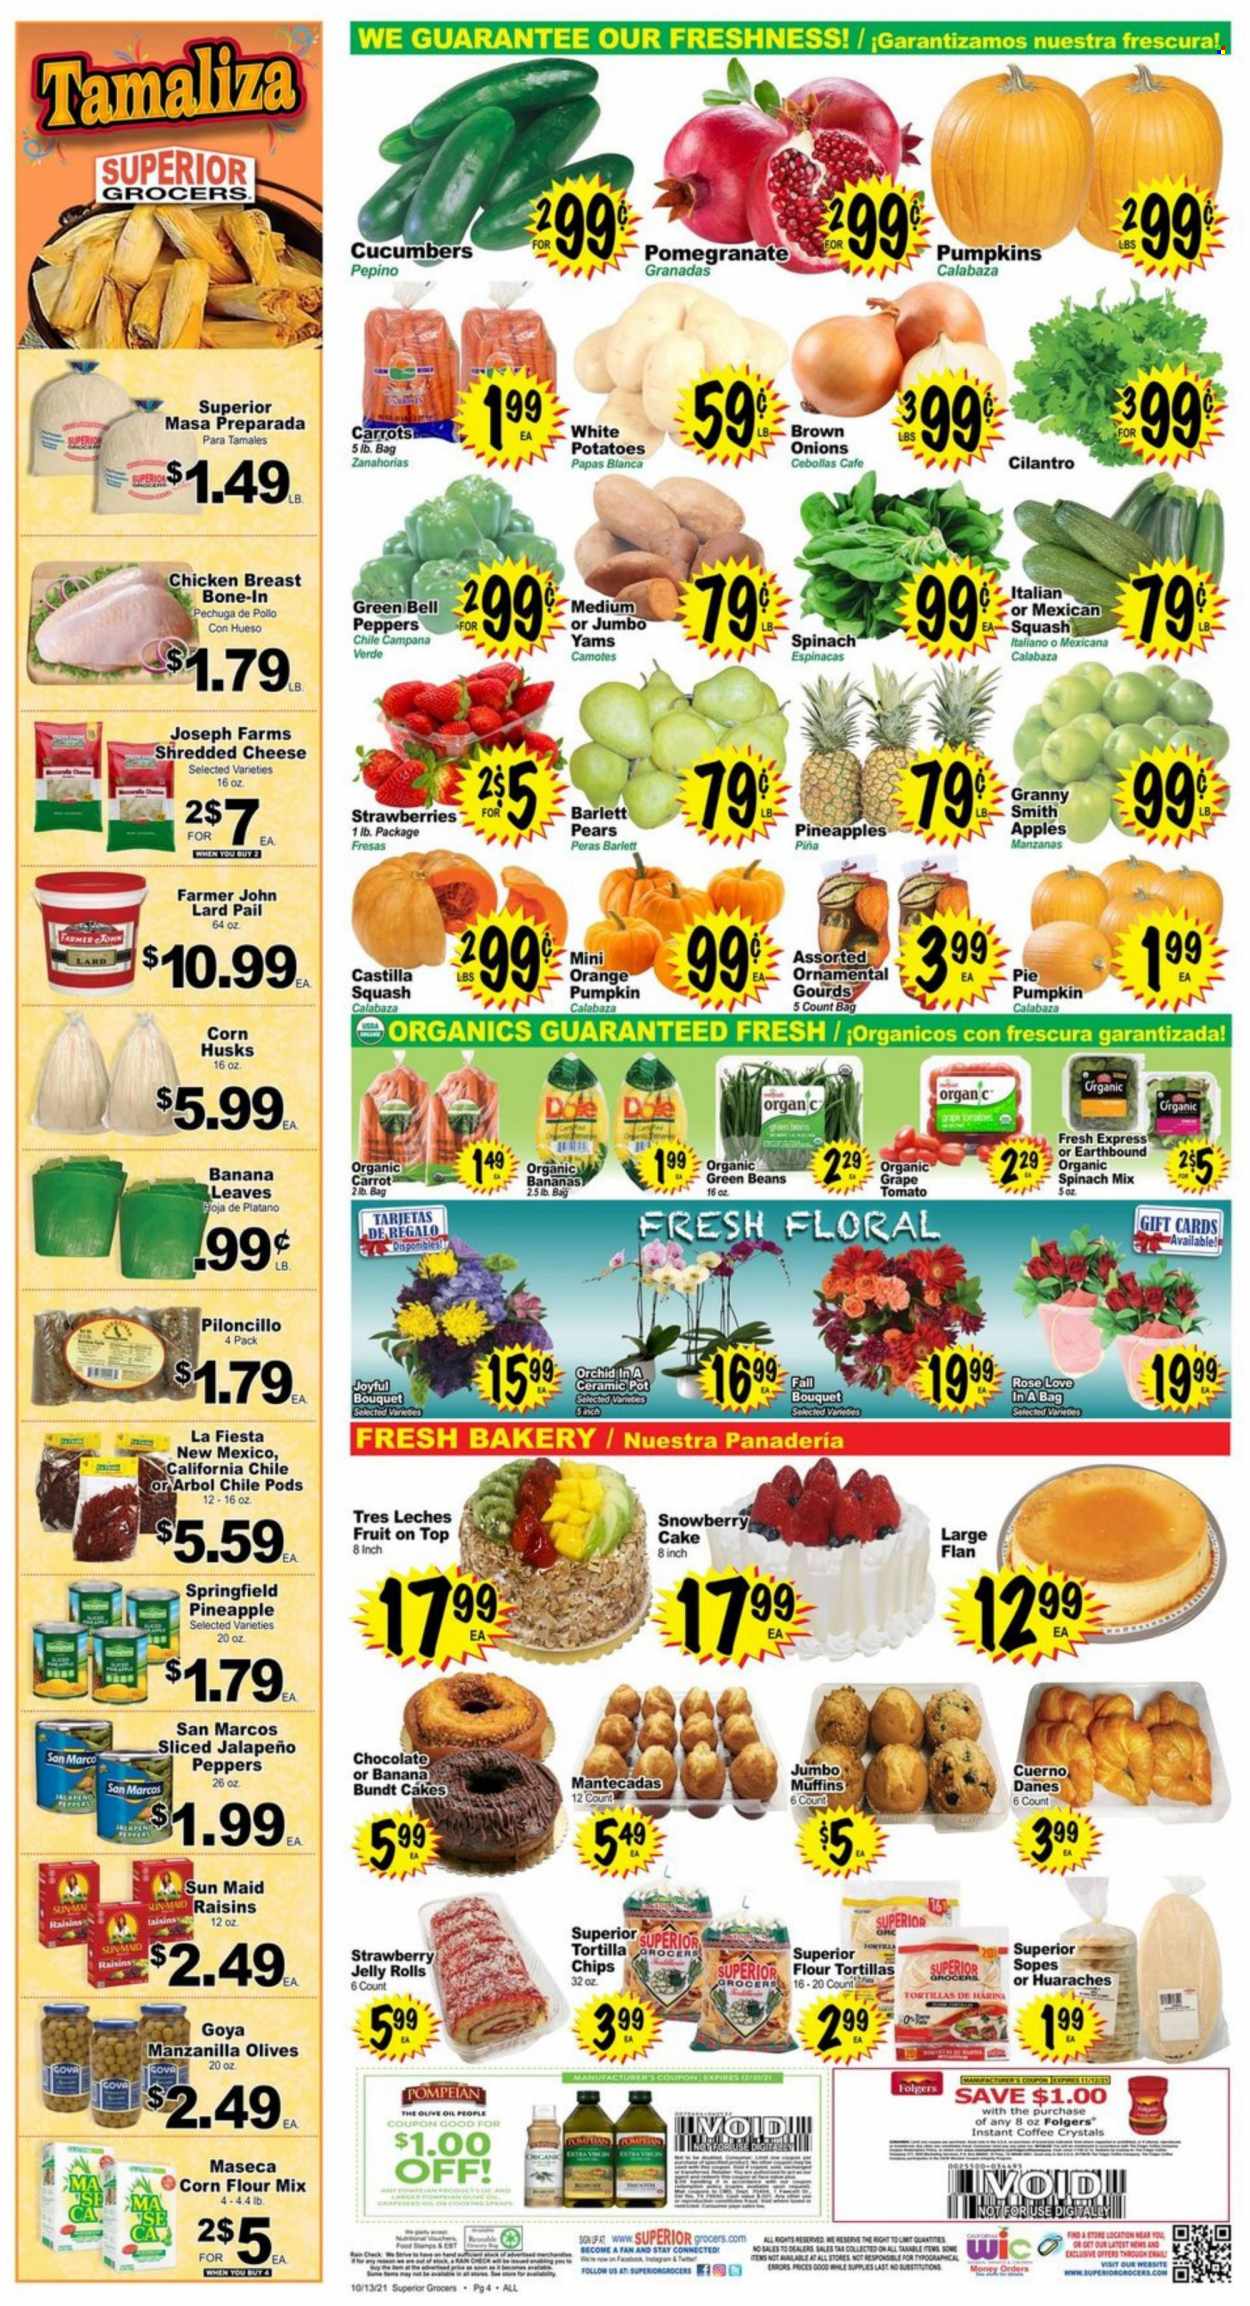 Superior Grocers ad  - 10.13.2021 - 10.19.2021.